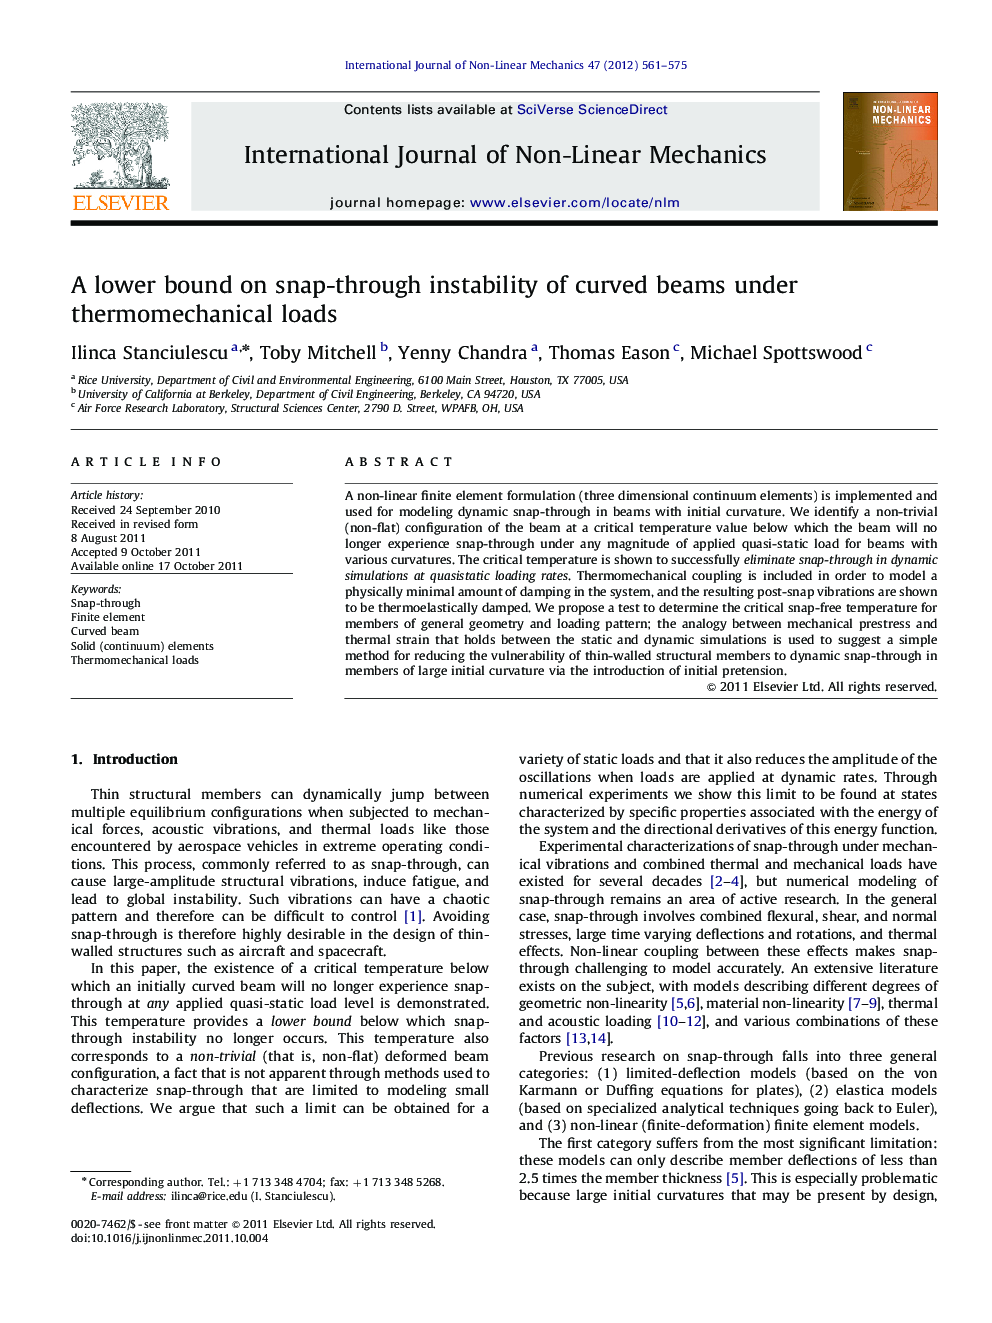 A lower bound on snap-through instability of curved beams under thermomechanical loads